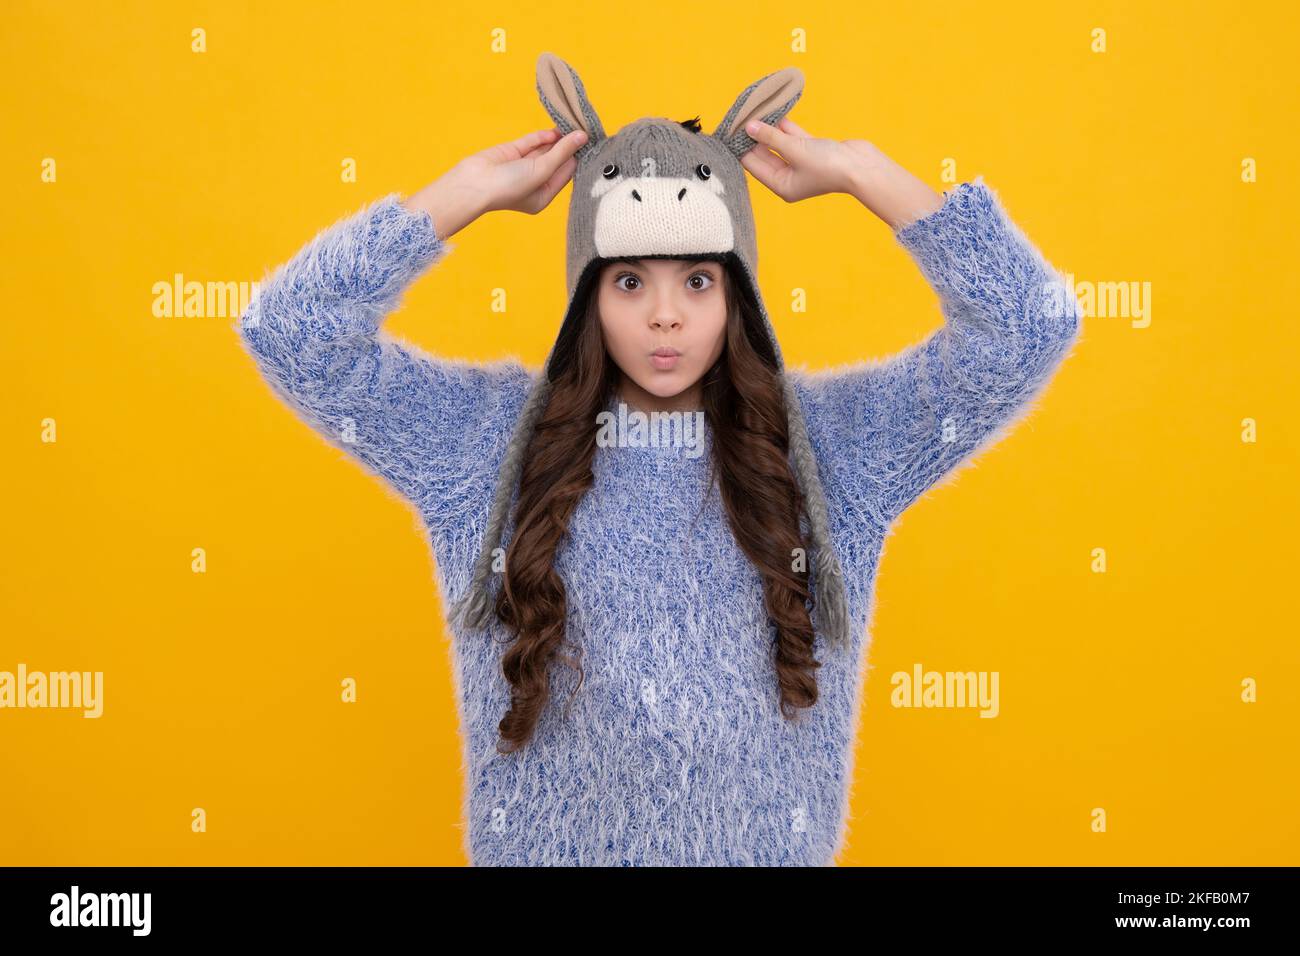 Beautiful winter kids portrait. Teenager girl posing with winter sweater and knit hat on yellow background. Funny face. Stock Photo